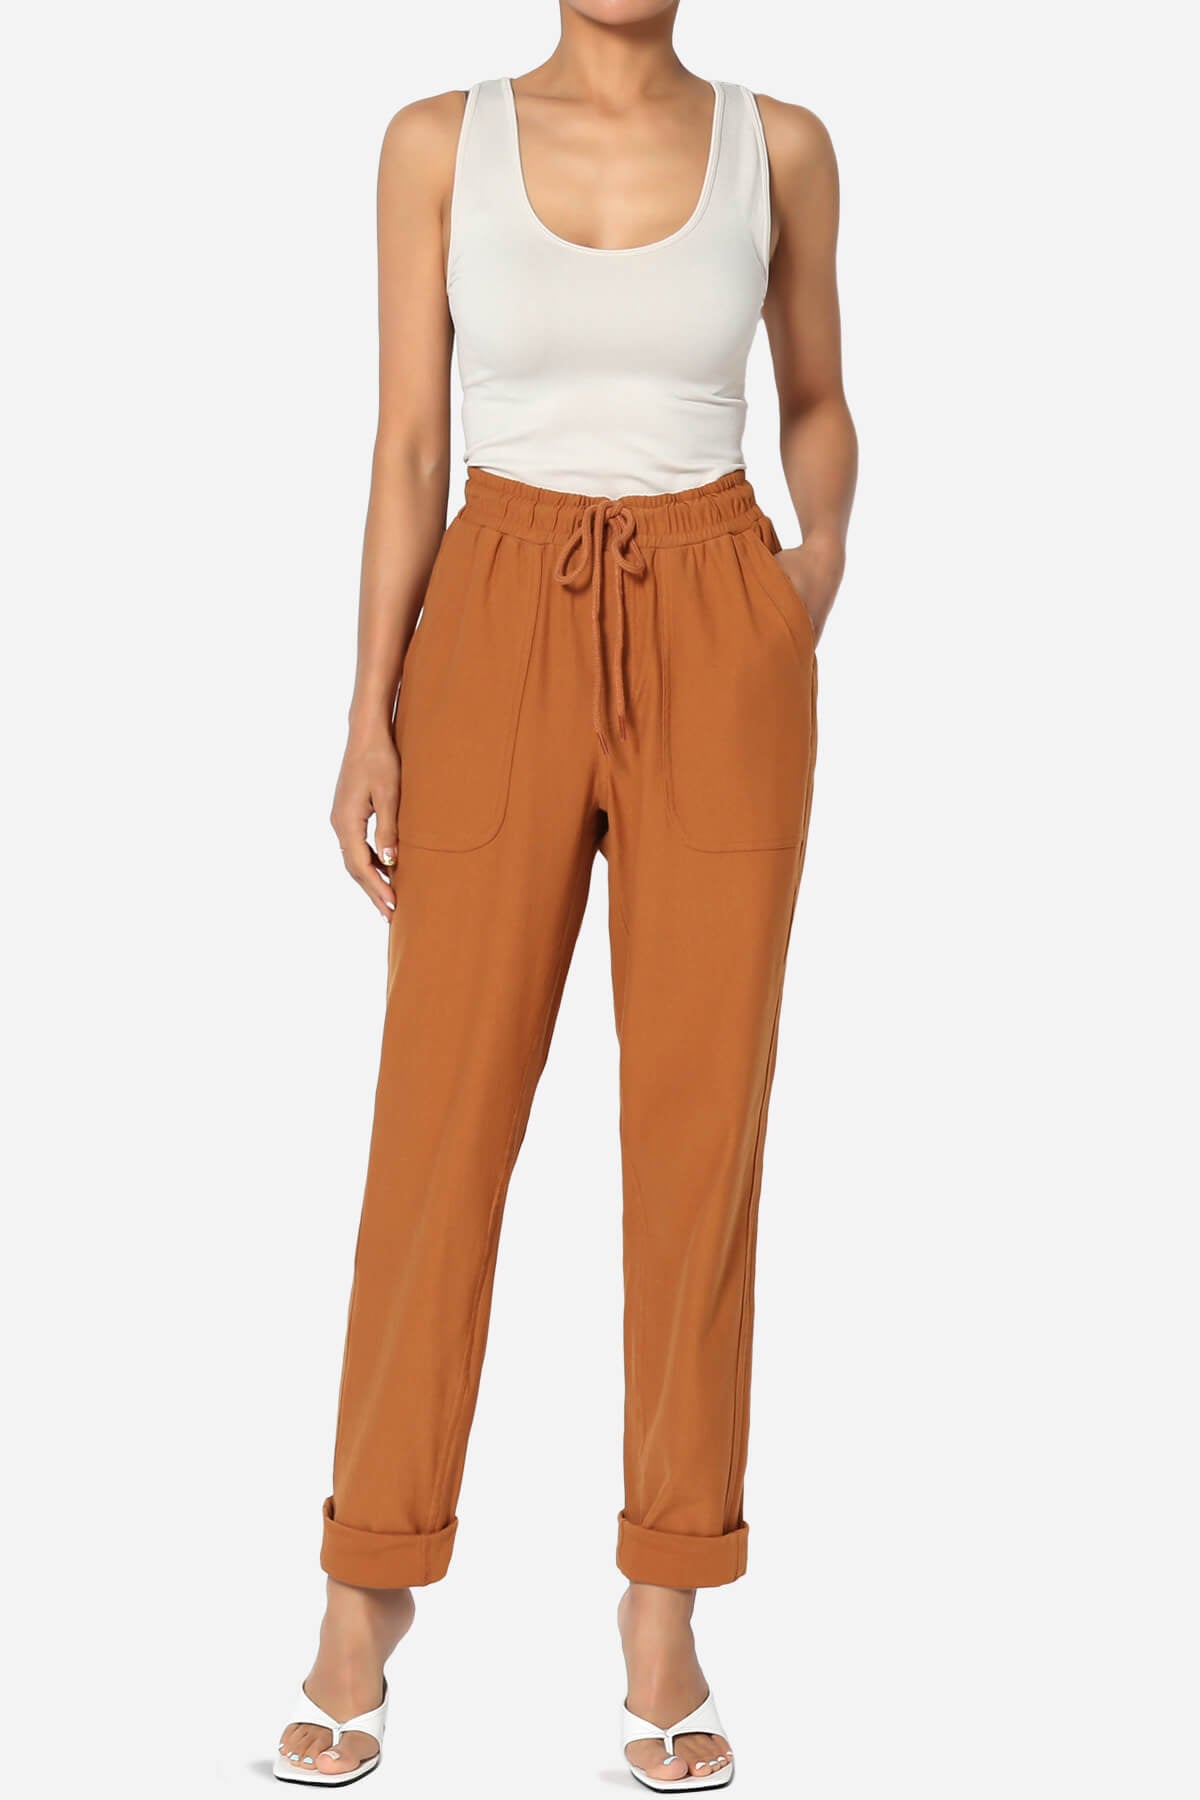 Load image into Gallery viewer, Vex Cuffed Relaxed Stretch Twill Pants
